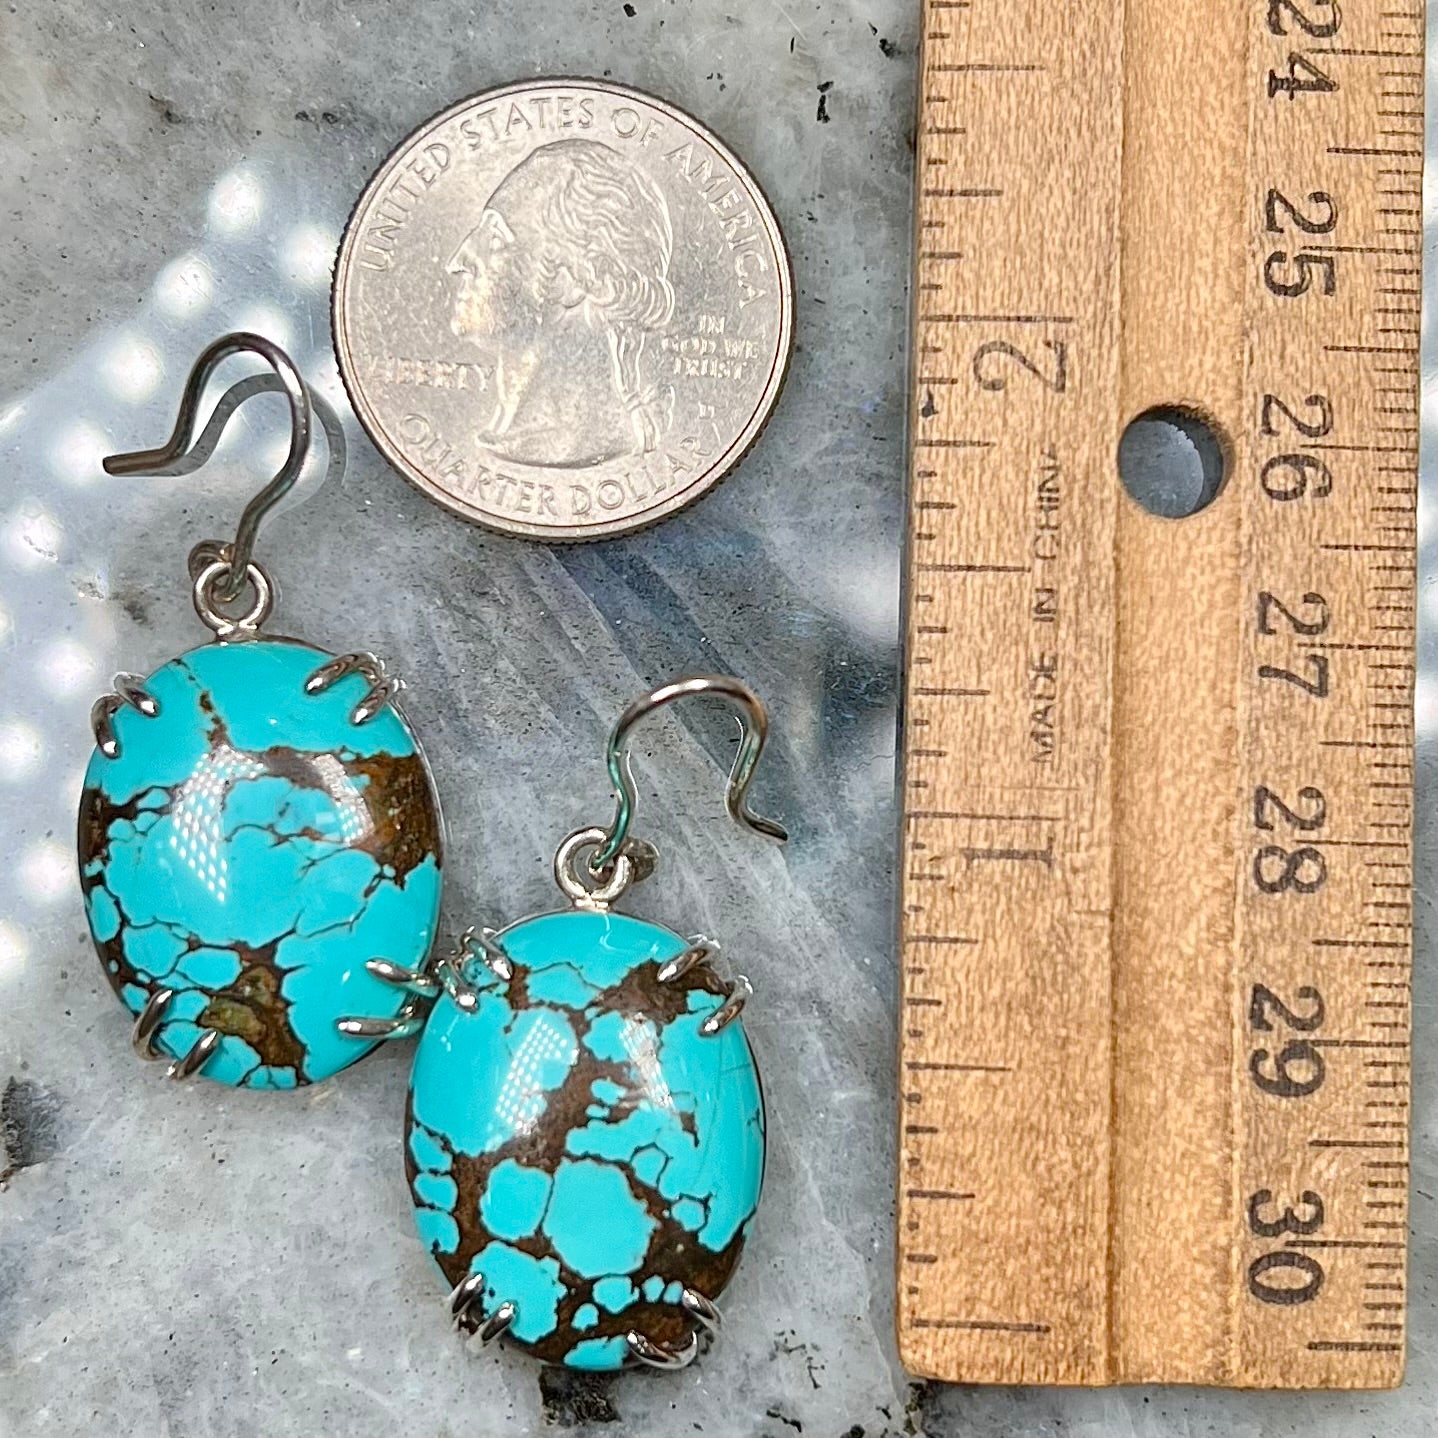 Sterling silver French wire earrings double prong set with cabochon cut turquoise from Valley Blue Mine in Lander County, Nevada.